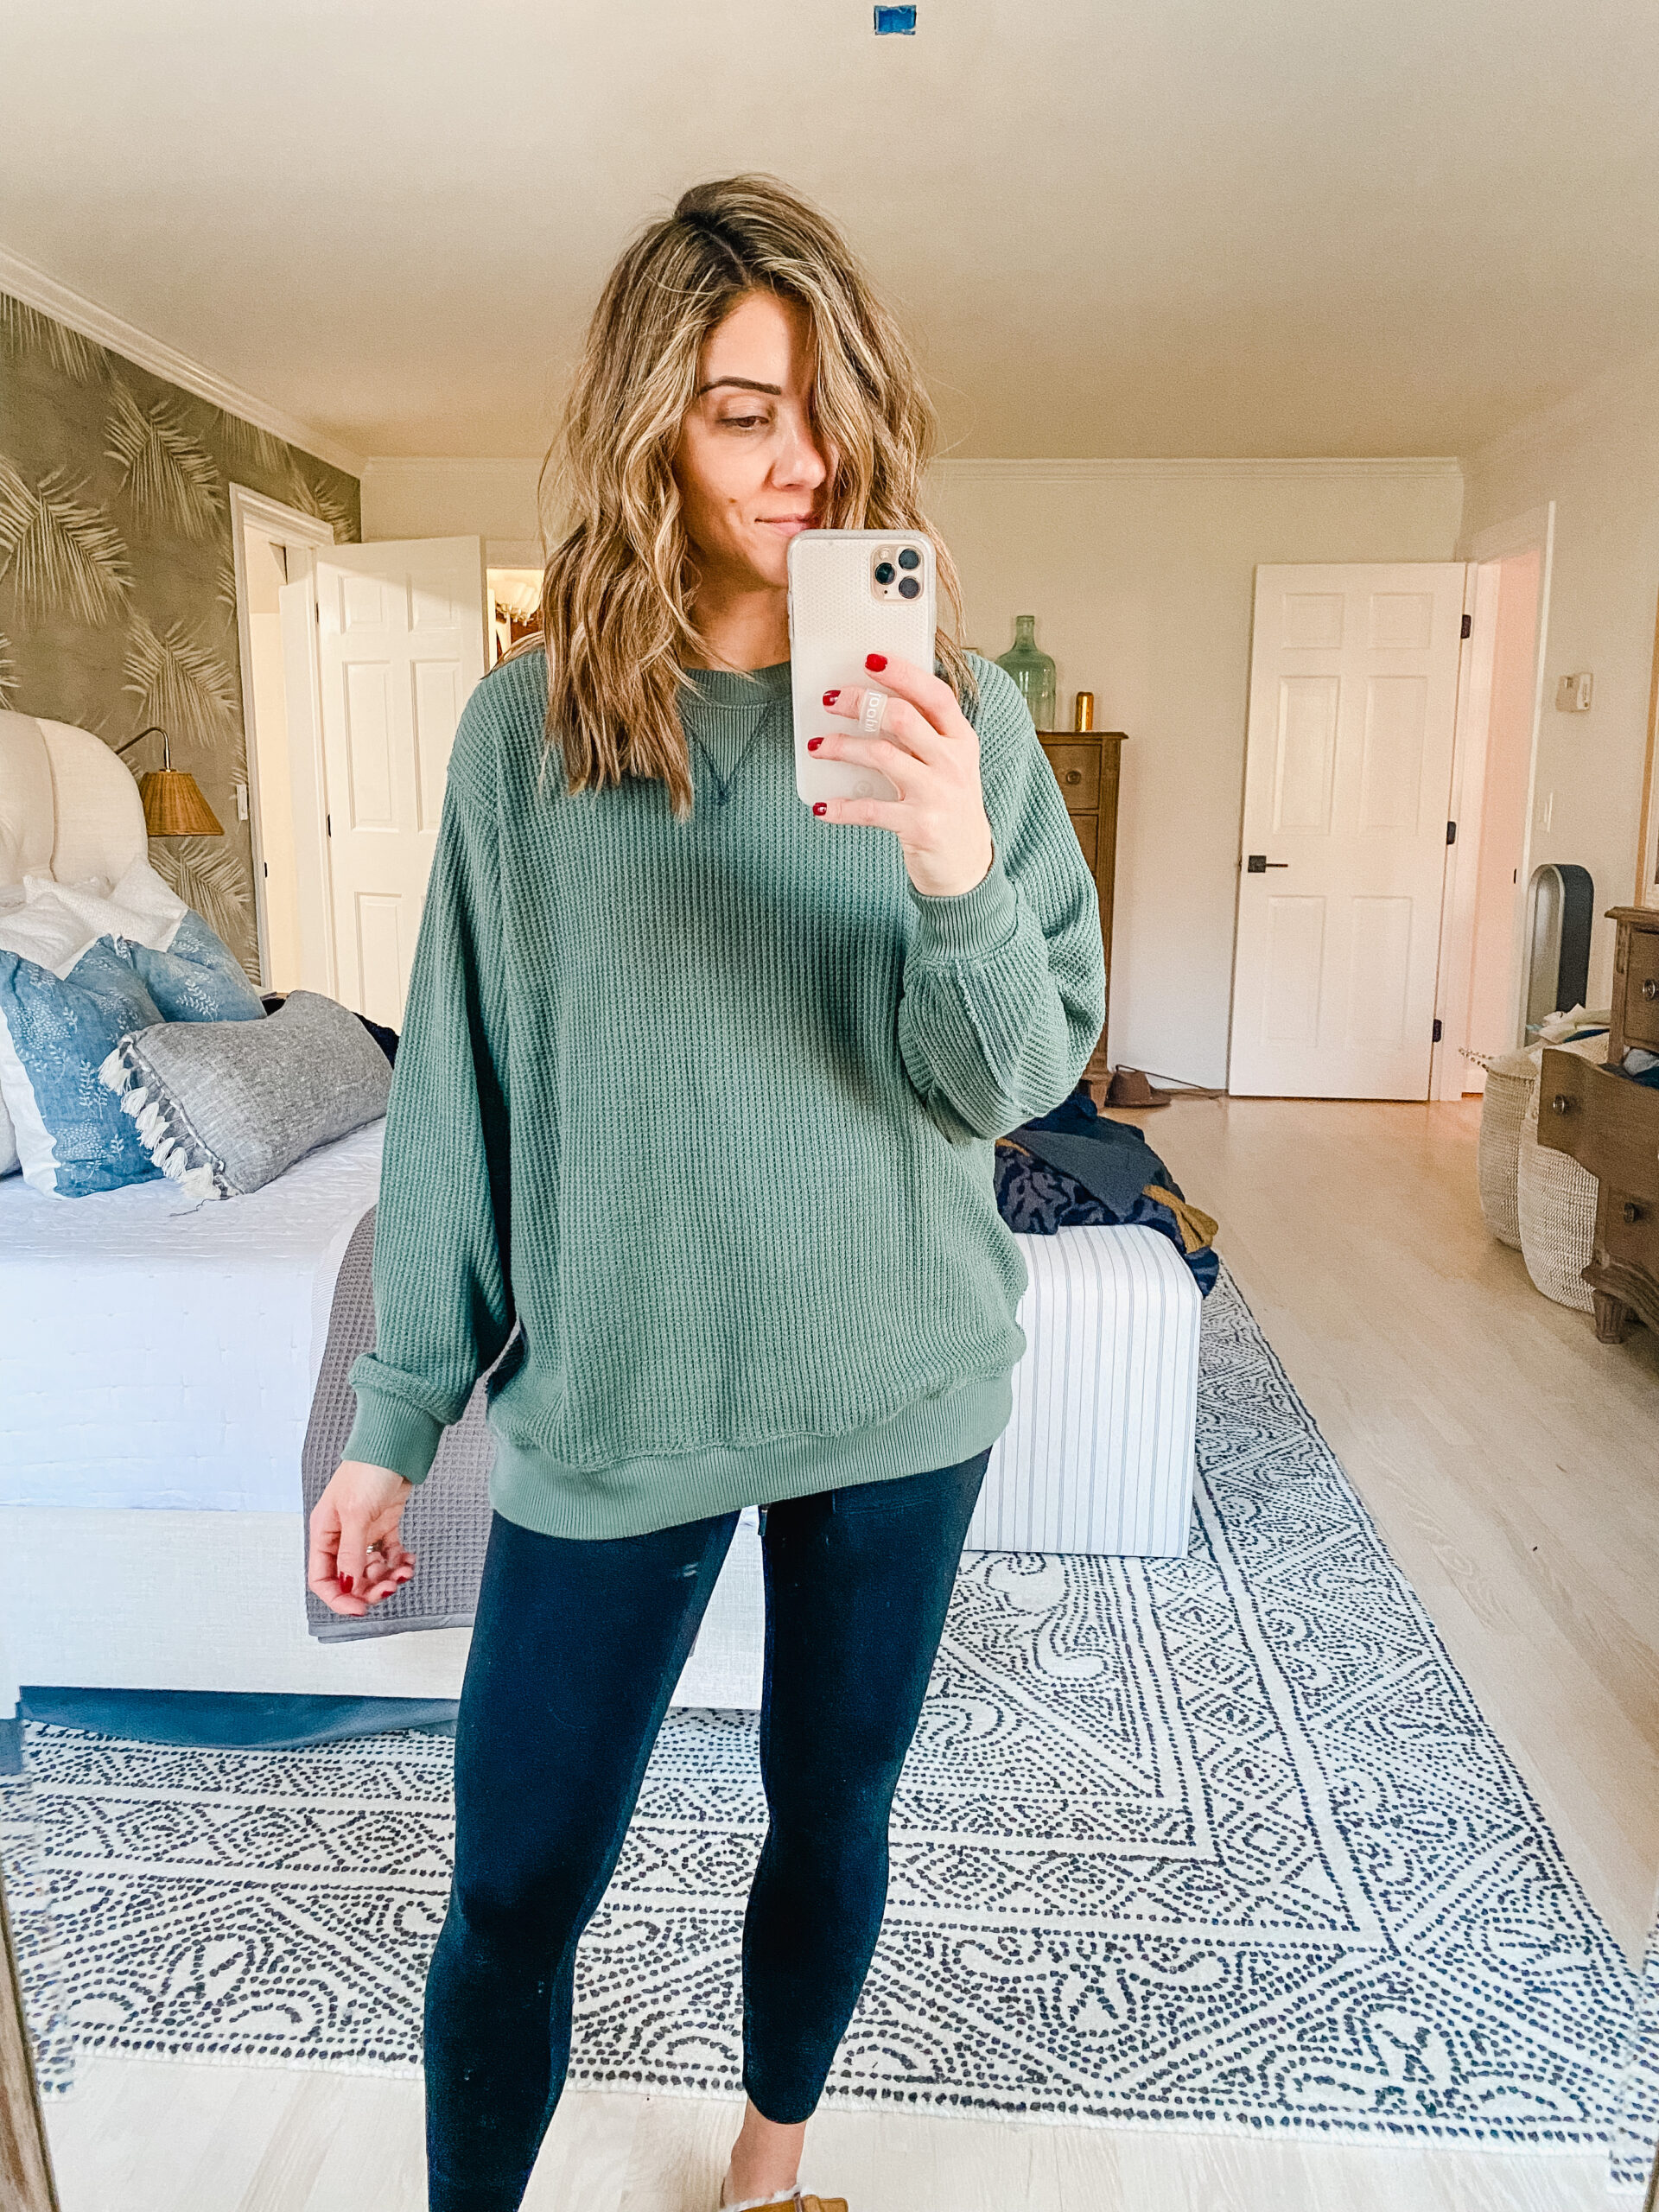 Connecticut life and style blogger Lauren McBride shares a loungewear try on from Aerie featuring sweaters, sweatshirts, and fleeces.